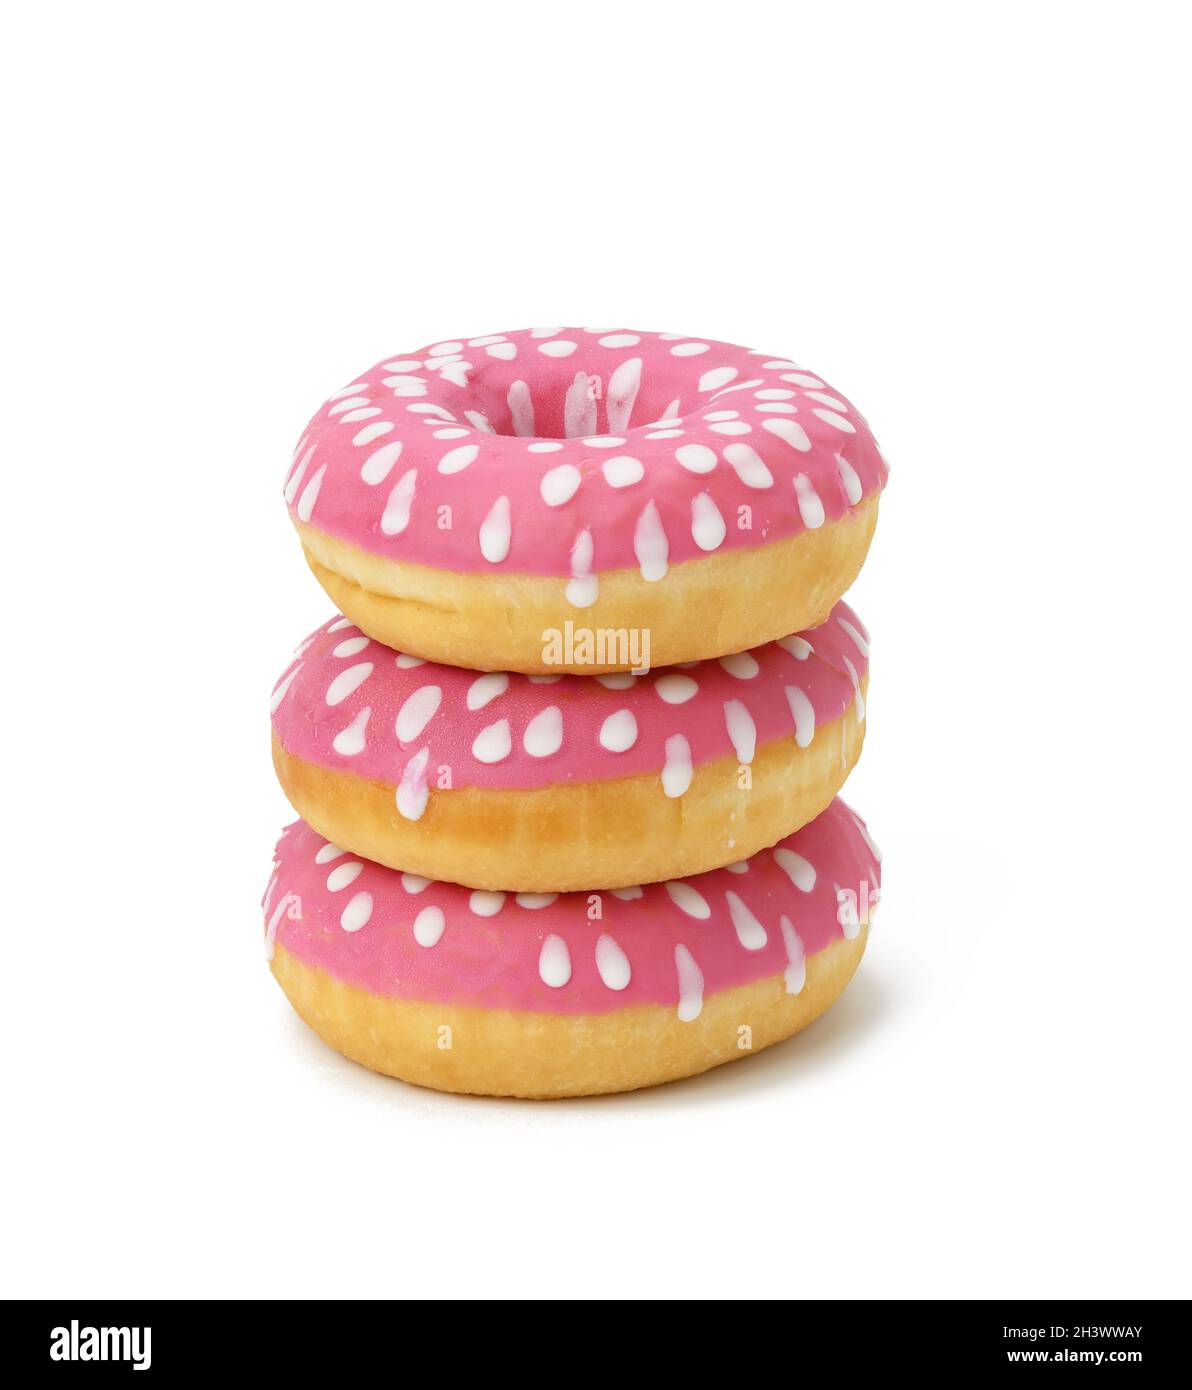 Baked round donut with pink icing and white dots isolated on white background, close up Stock Photo